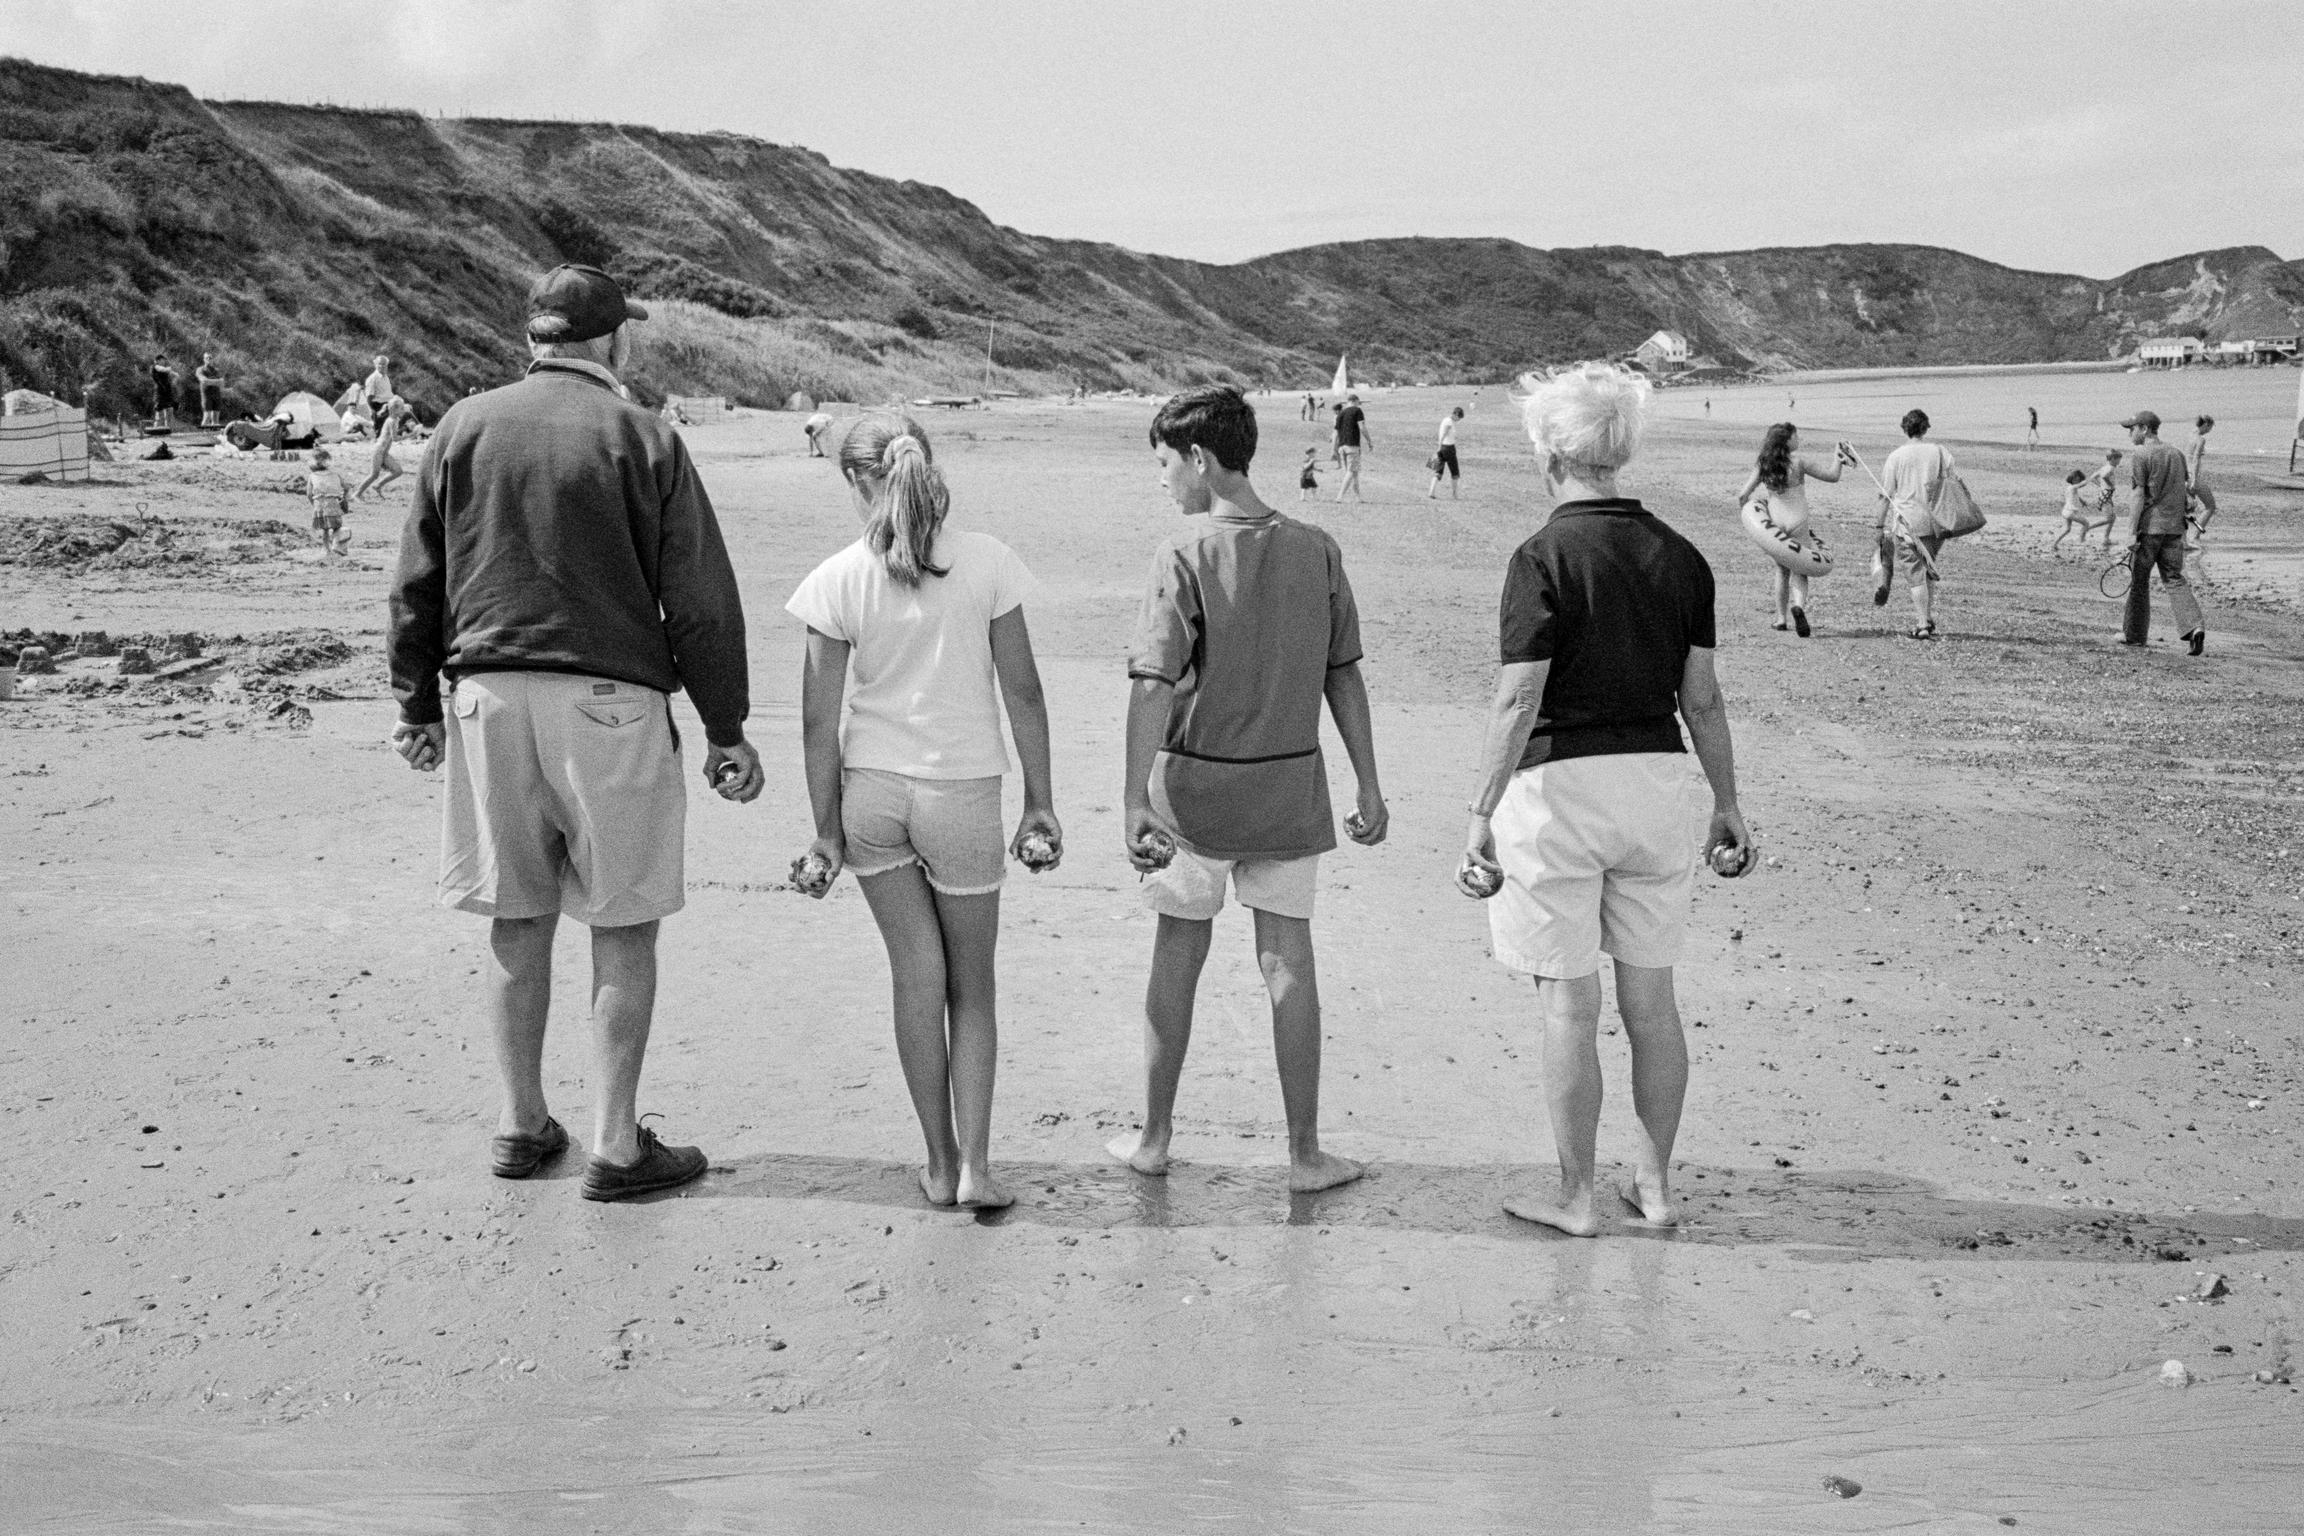 Playing Boule on the beach. Europe comes to North Wales. Porth Dinllaen, Wales